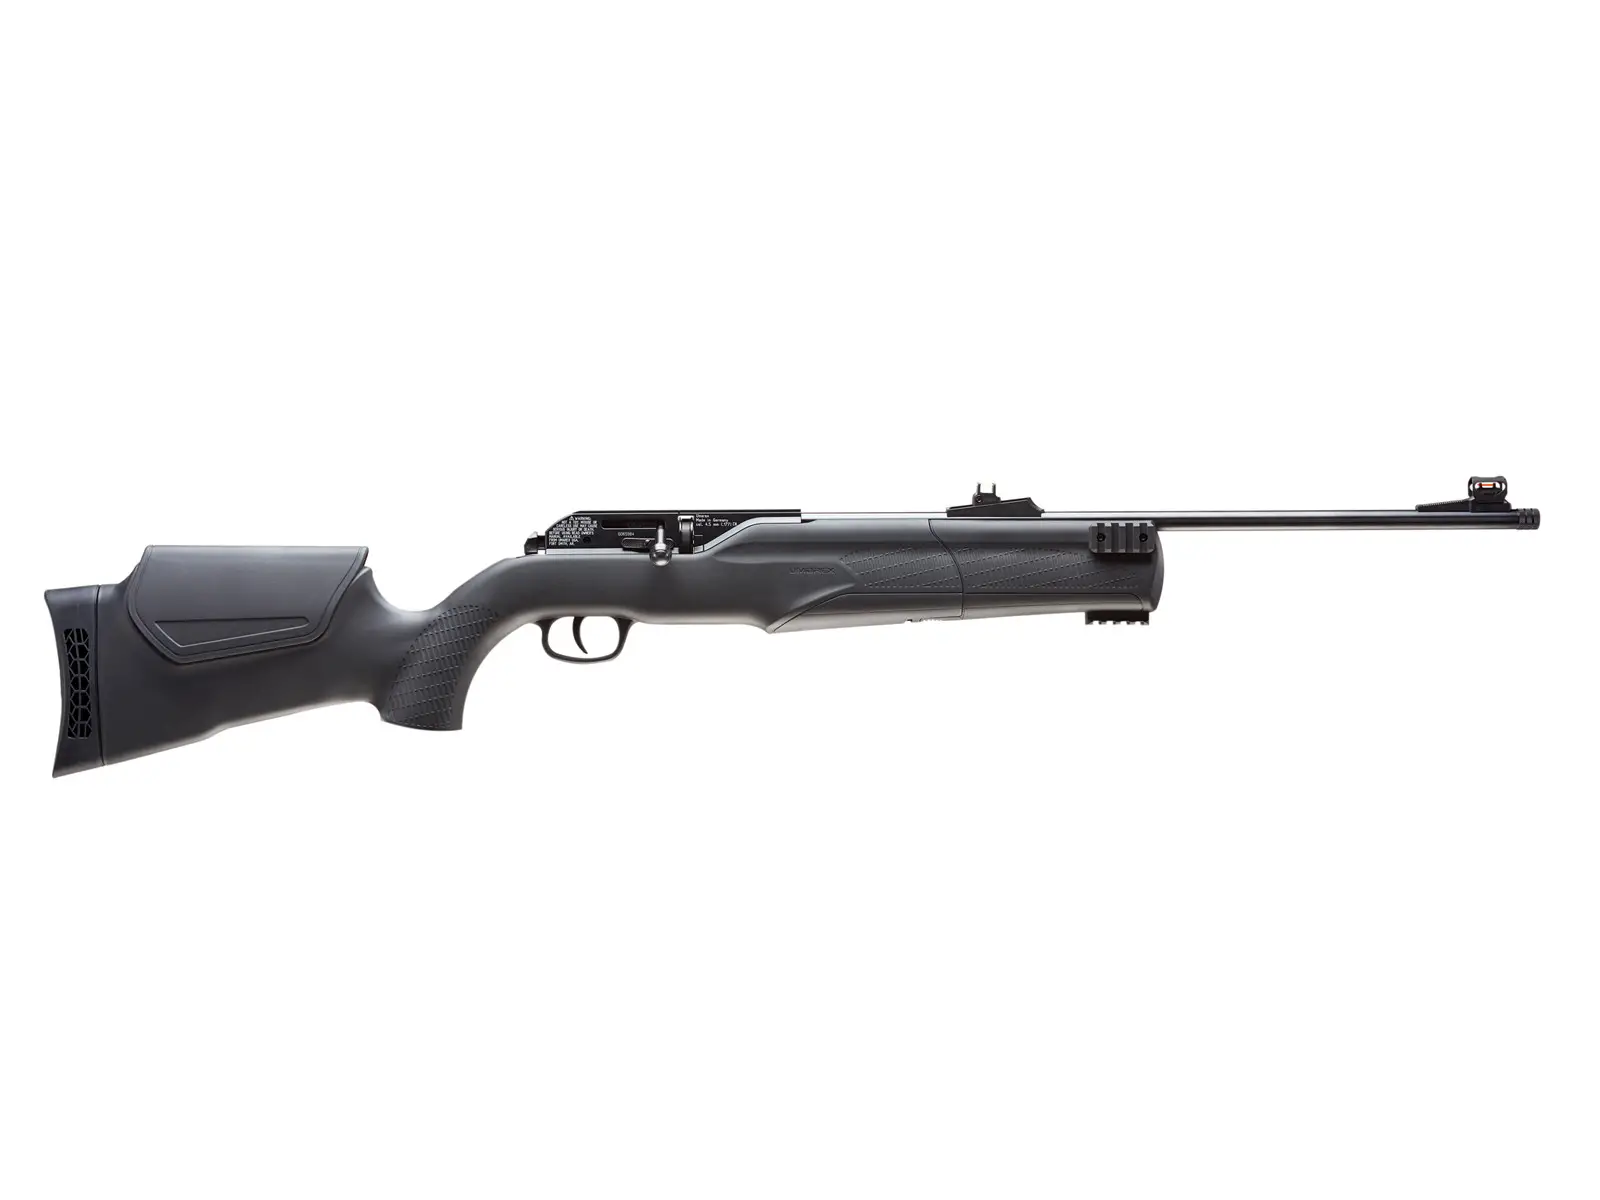 850 1 Best .22 Air Rifles - Top 11 fantastic guns for the money (Reviews and Buying Guide 2022)